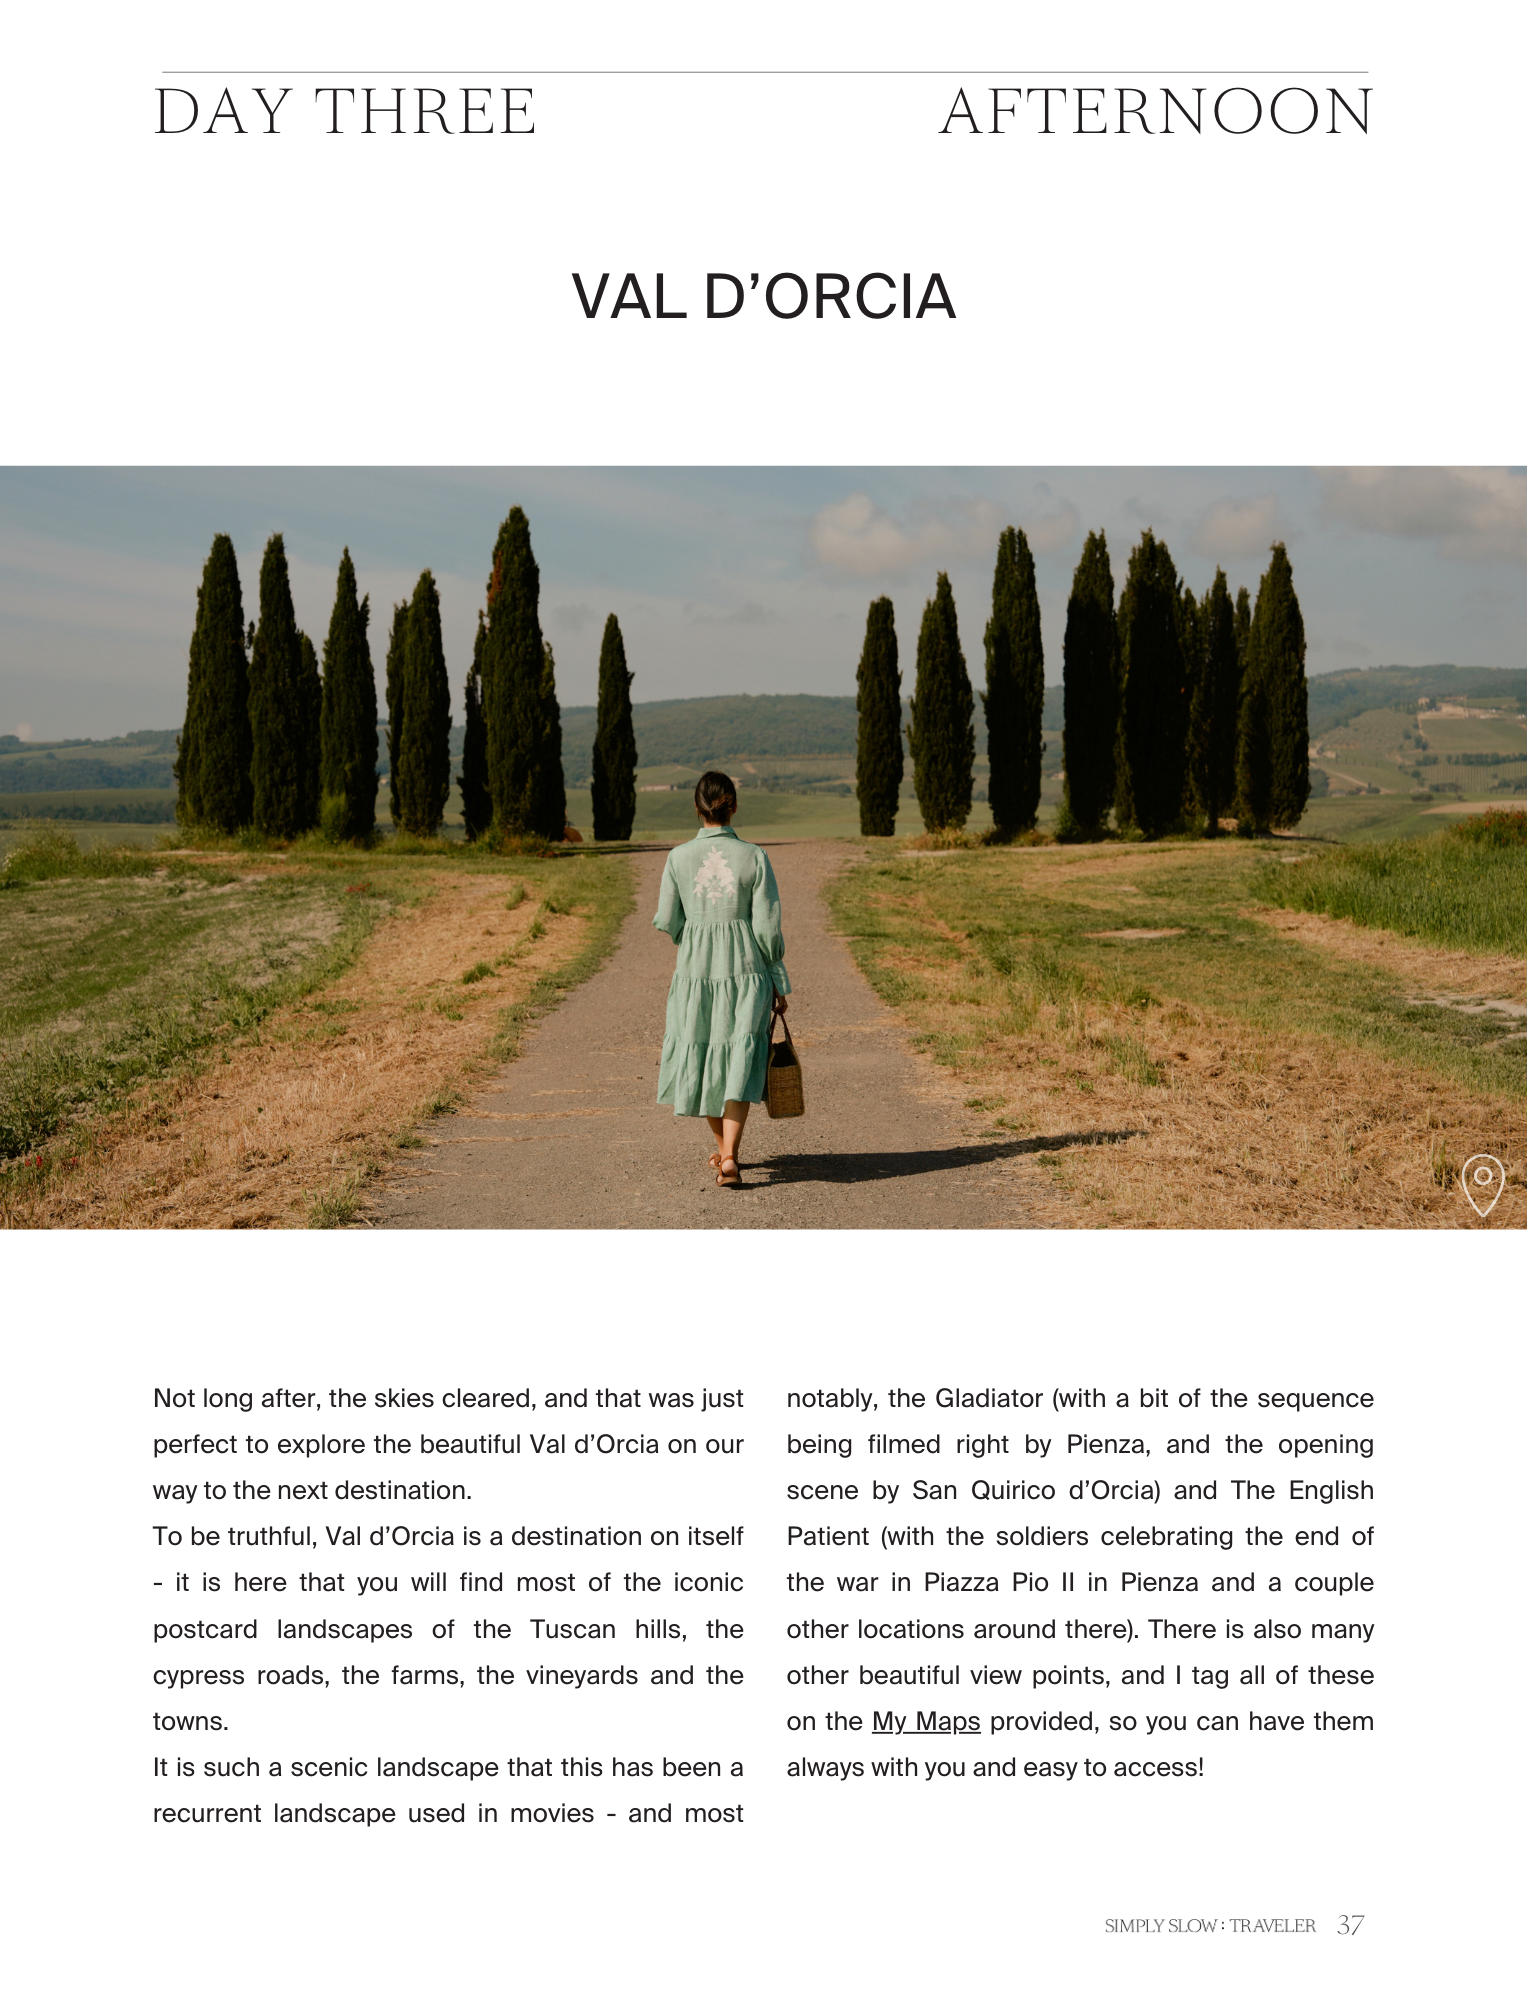 A Guide to Tuscany - page dedicated to Val d'Orcia, by Simply Slow Traveler